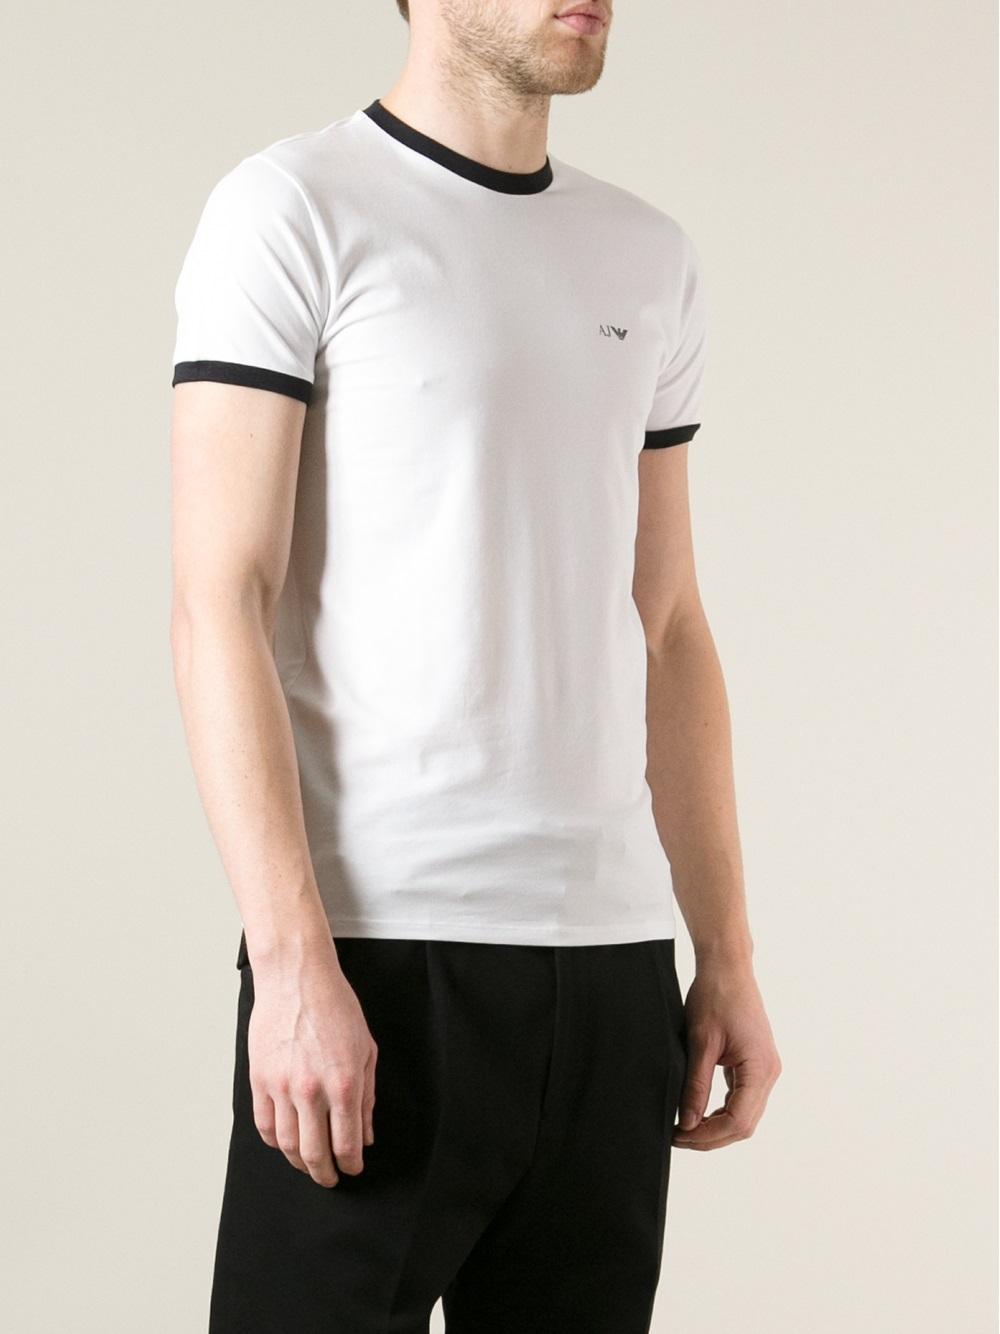 Lyst - Armani Jeans Classic Tshirt in White for Men